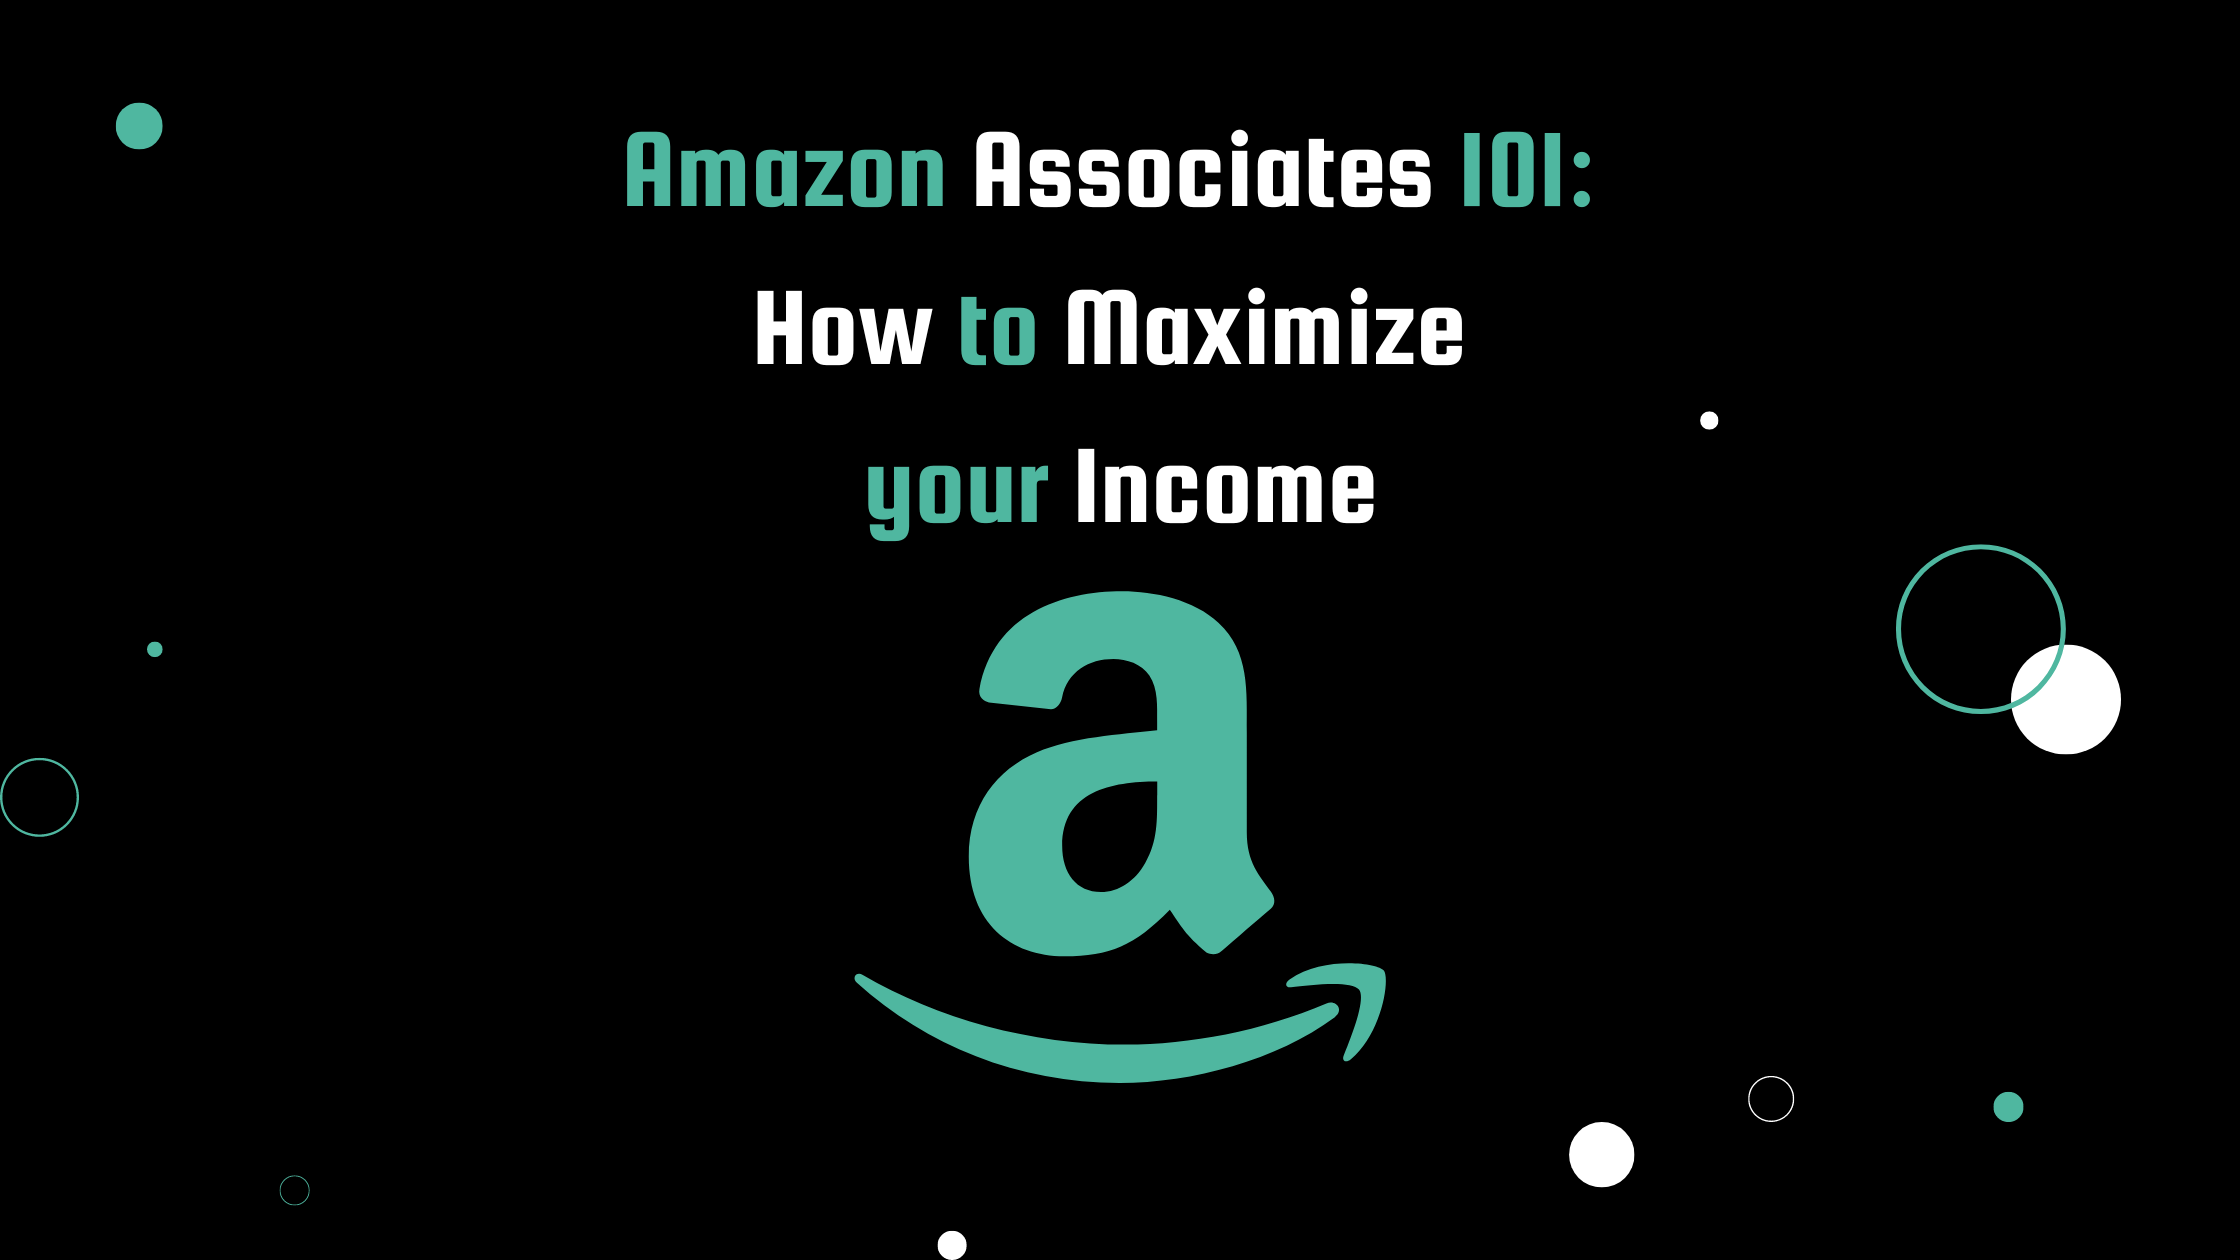 Amazon Associates 101: How to Maximize your Income - Tony Reviews Things